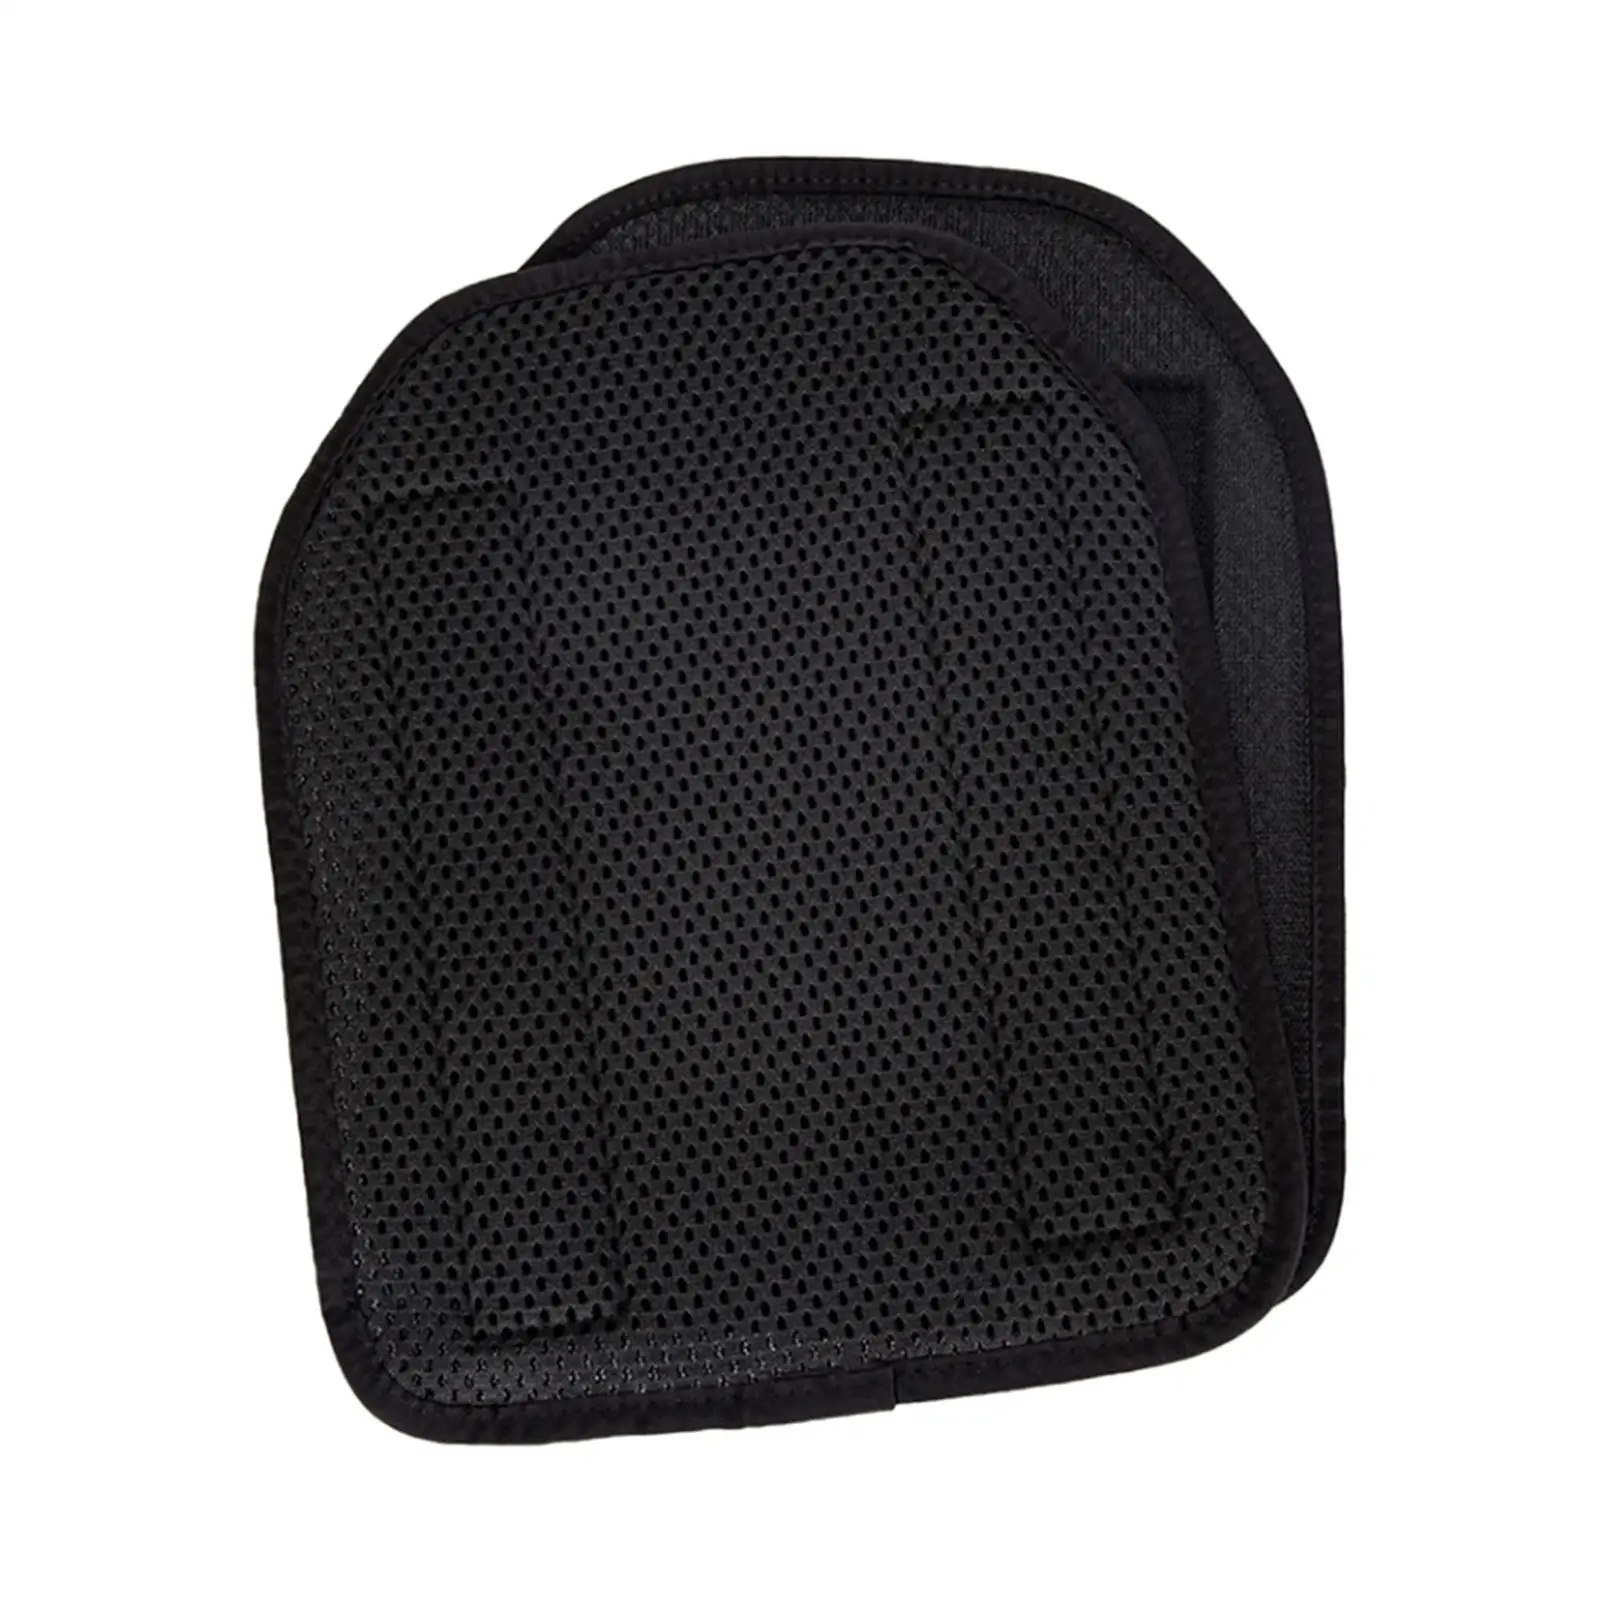 2 Pieces Gear Vest Inner Liner Body Vest Plates Adjustable Back Thoracic Protection Vest Pad Plates for Outdoor